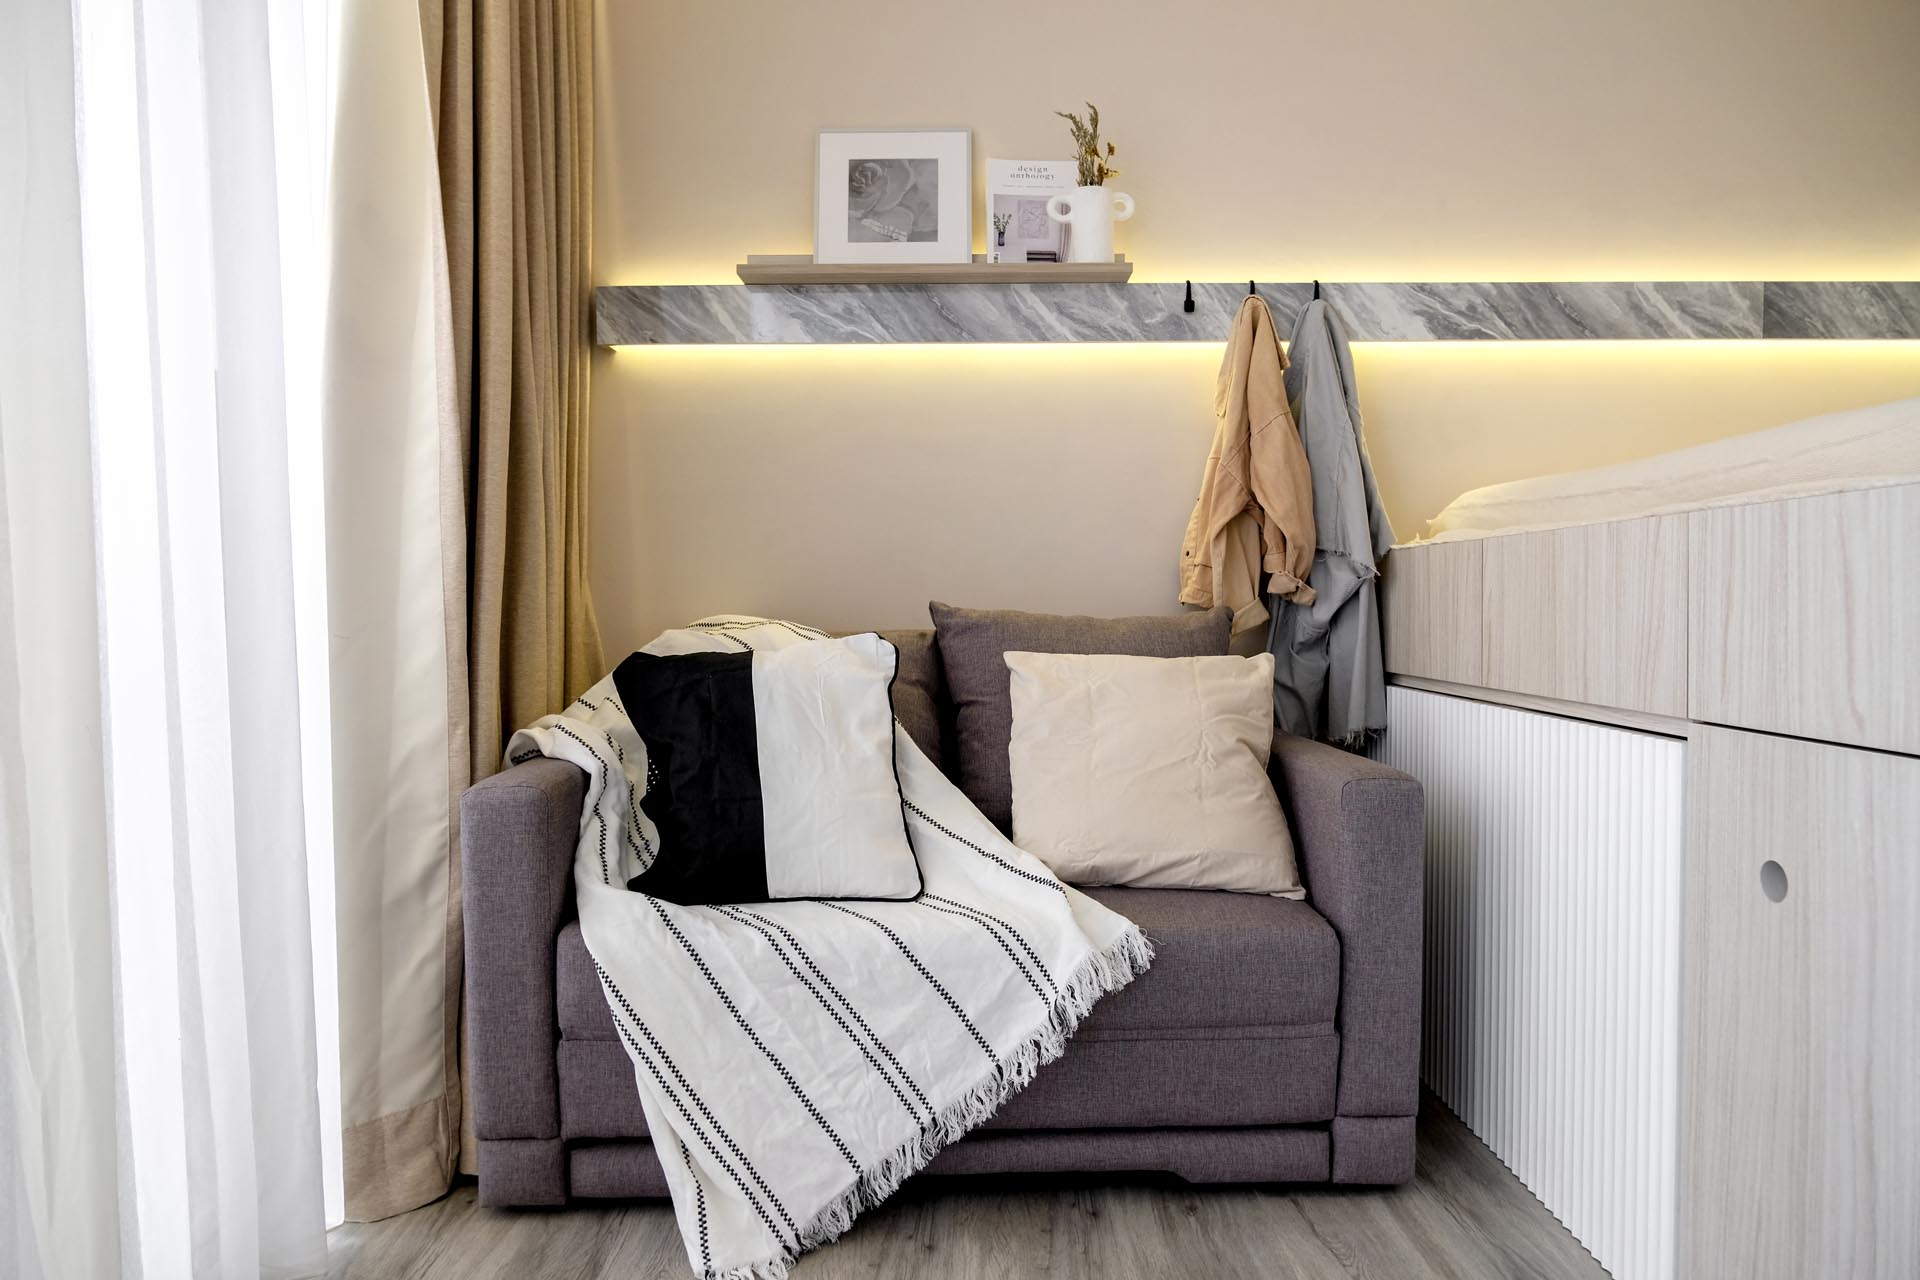 At the end of a platform bed is a small two-seater sofa which can transform into a guest bed when needed.